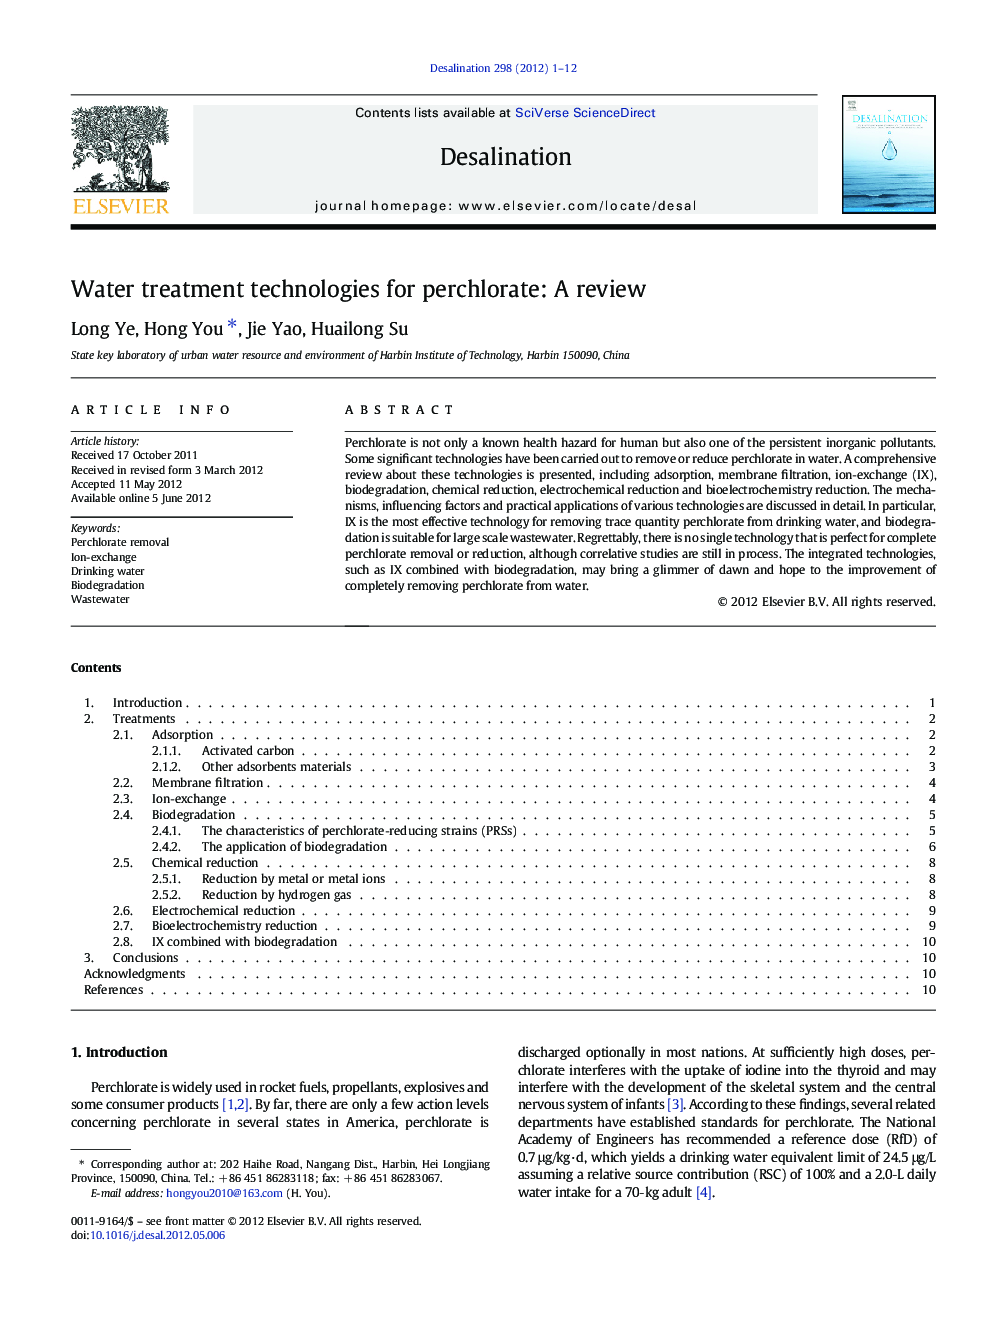 Water treatment technologies for perchlorate: A review